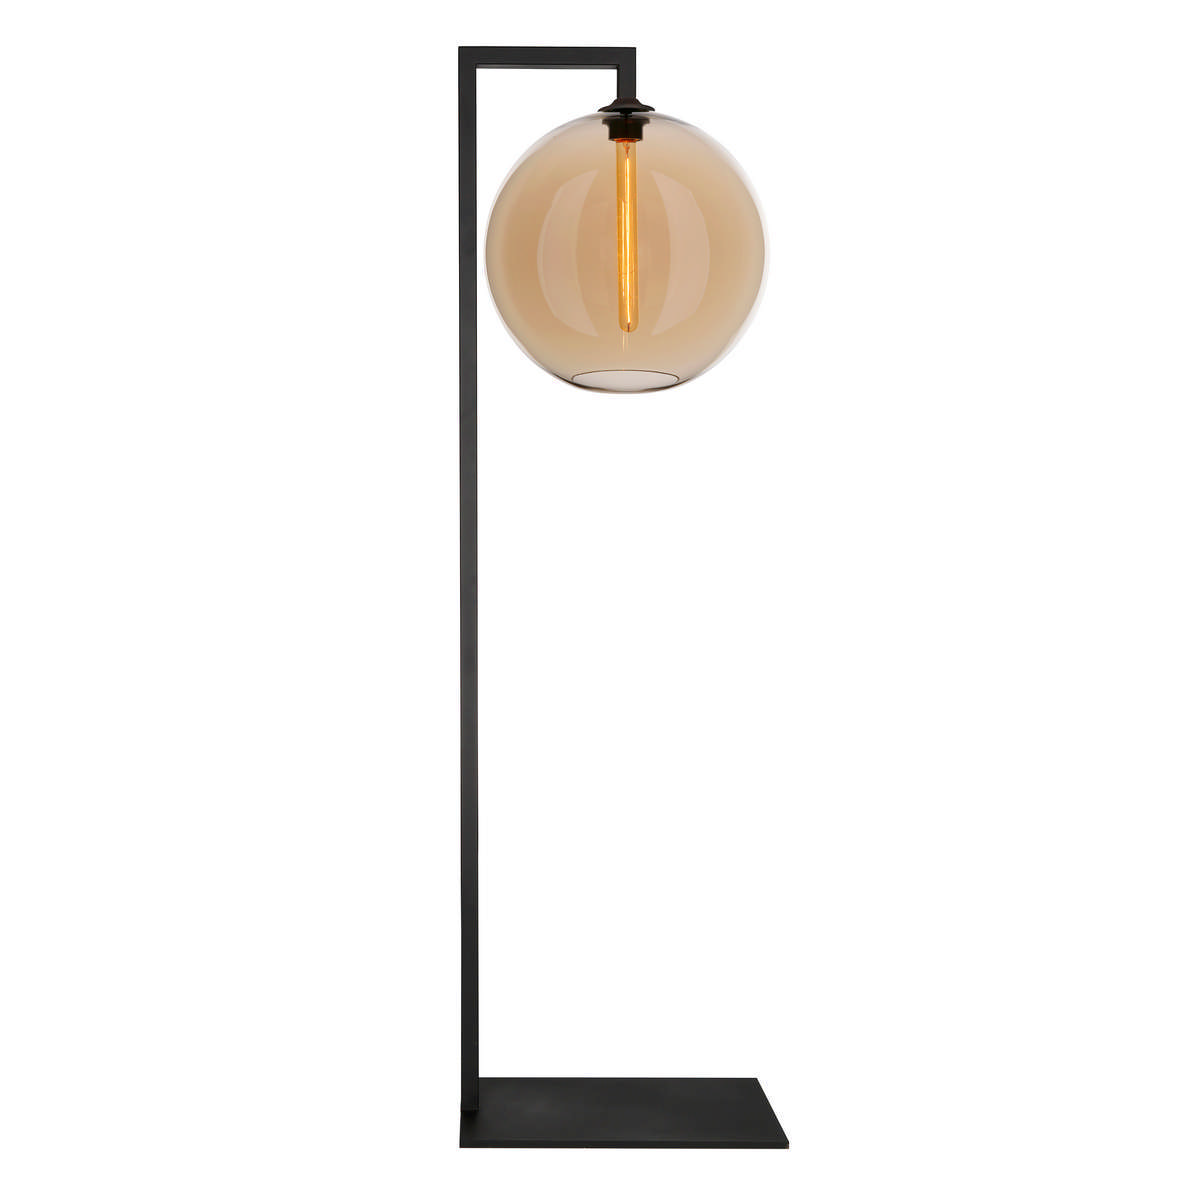 By Eve Eve Stand Maxi Staande lamp Collectie 3